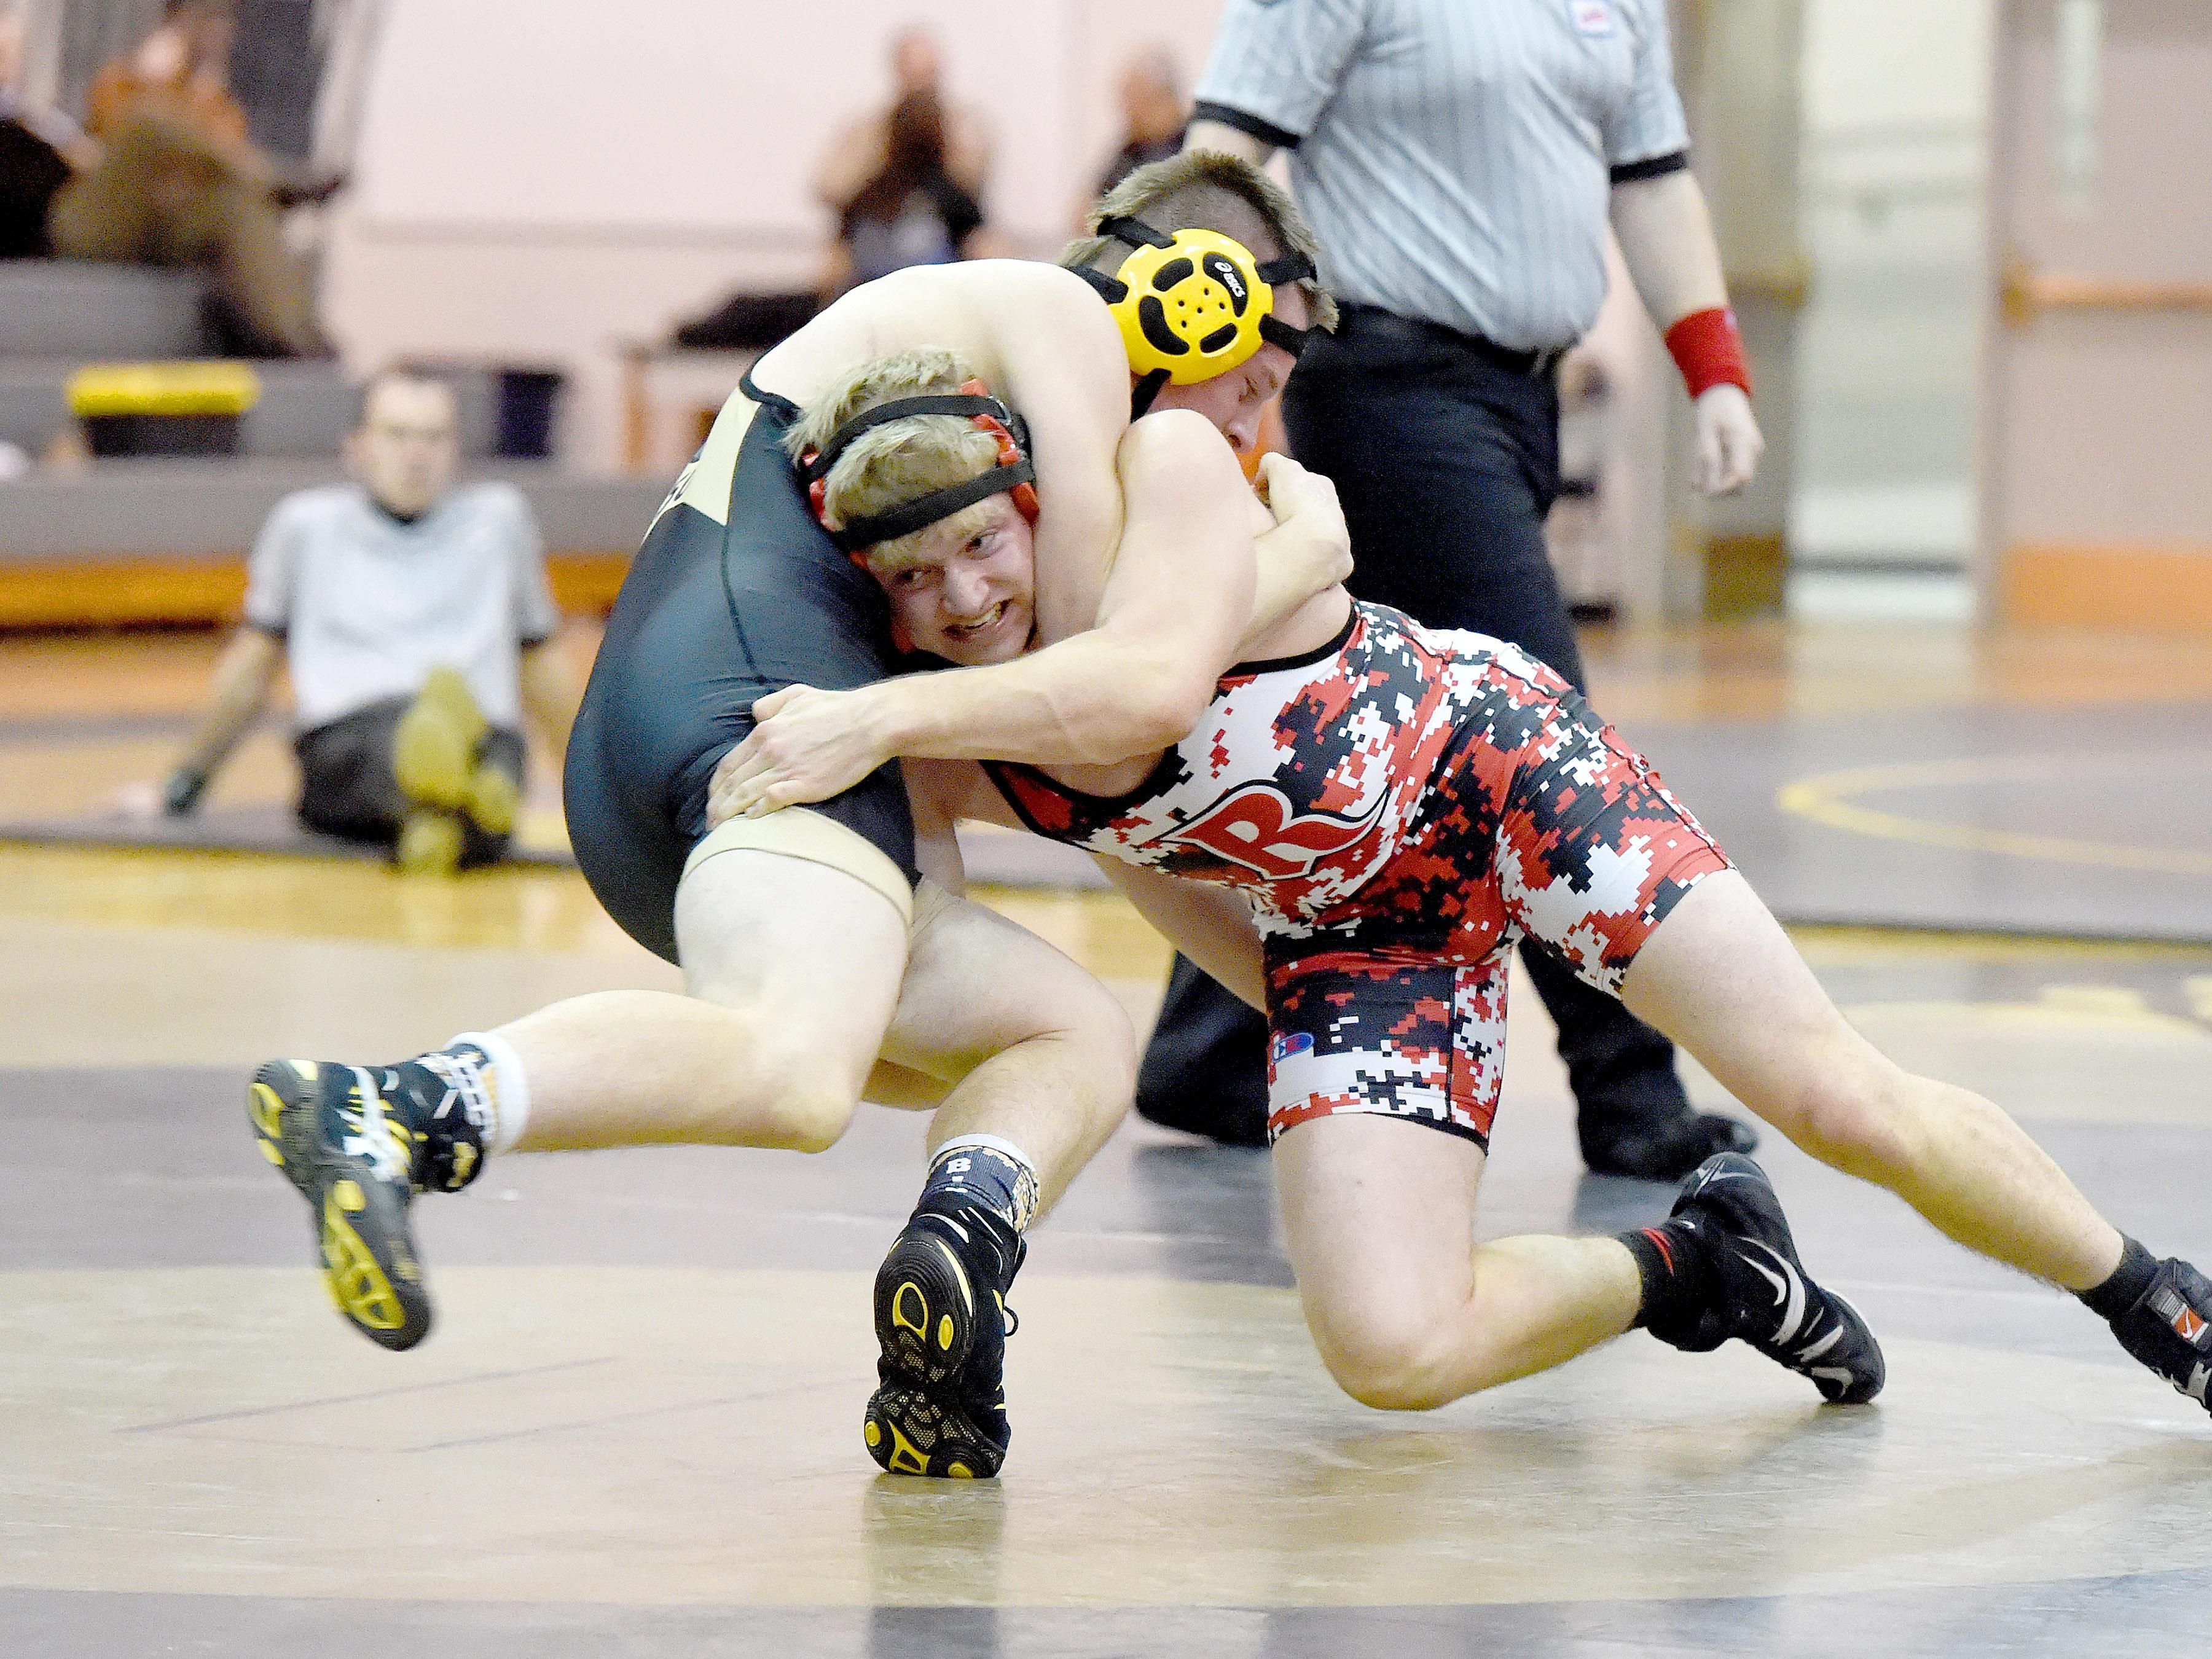 Riverheads’ Dillon Martin, right, wrestles Buffalo Gap’s Ryan Wilcher in a 160-pound weight class during the Bison Wrestling Quad in Swoope on Wednesday. Martin won the match.